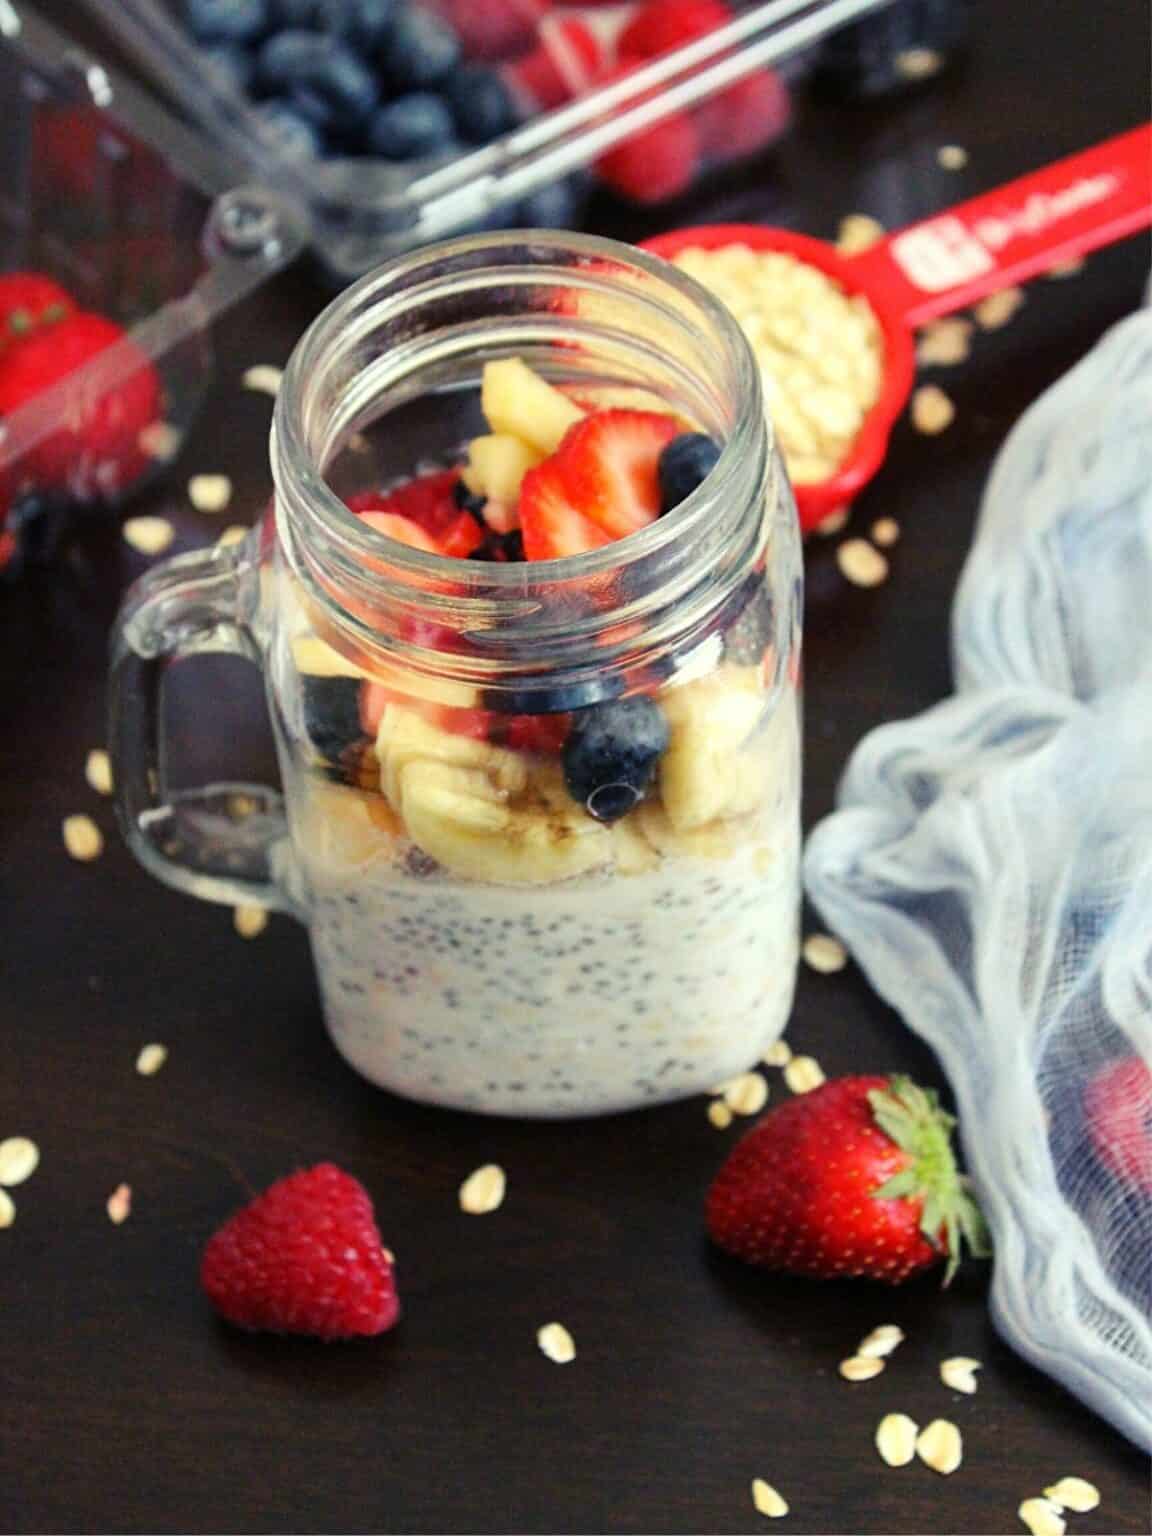 healthy overnight oats recipe for weight loss -Yummy Indian Kitchen